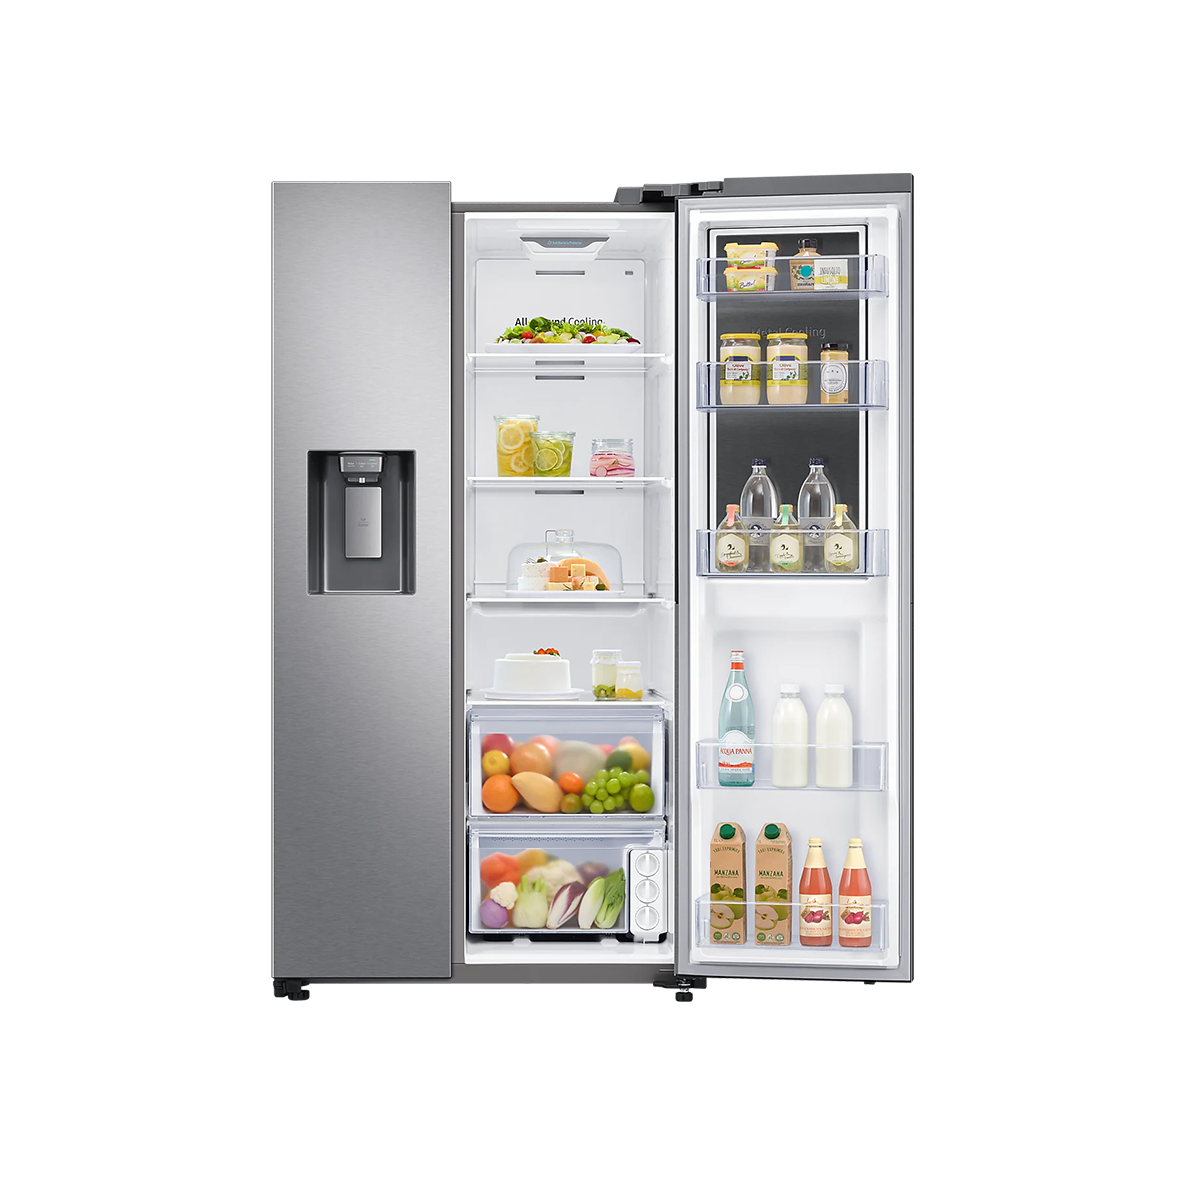 Samsung 849L Side-by-Side Refrigerator with Water Dispenser